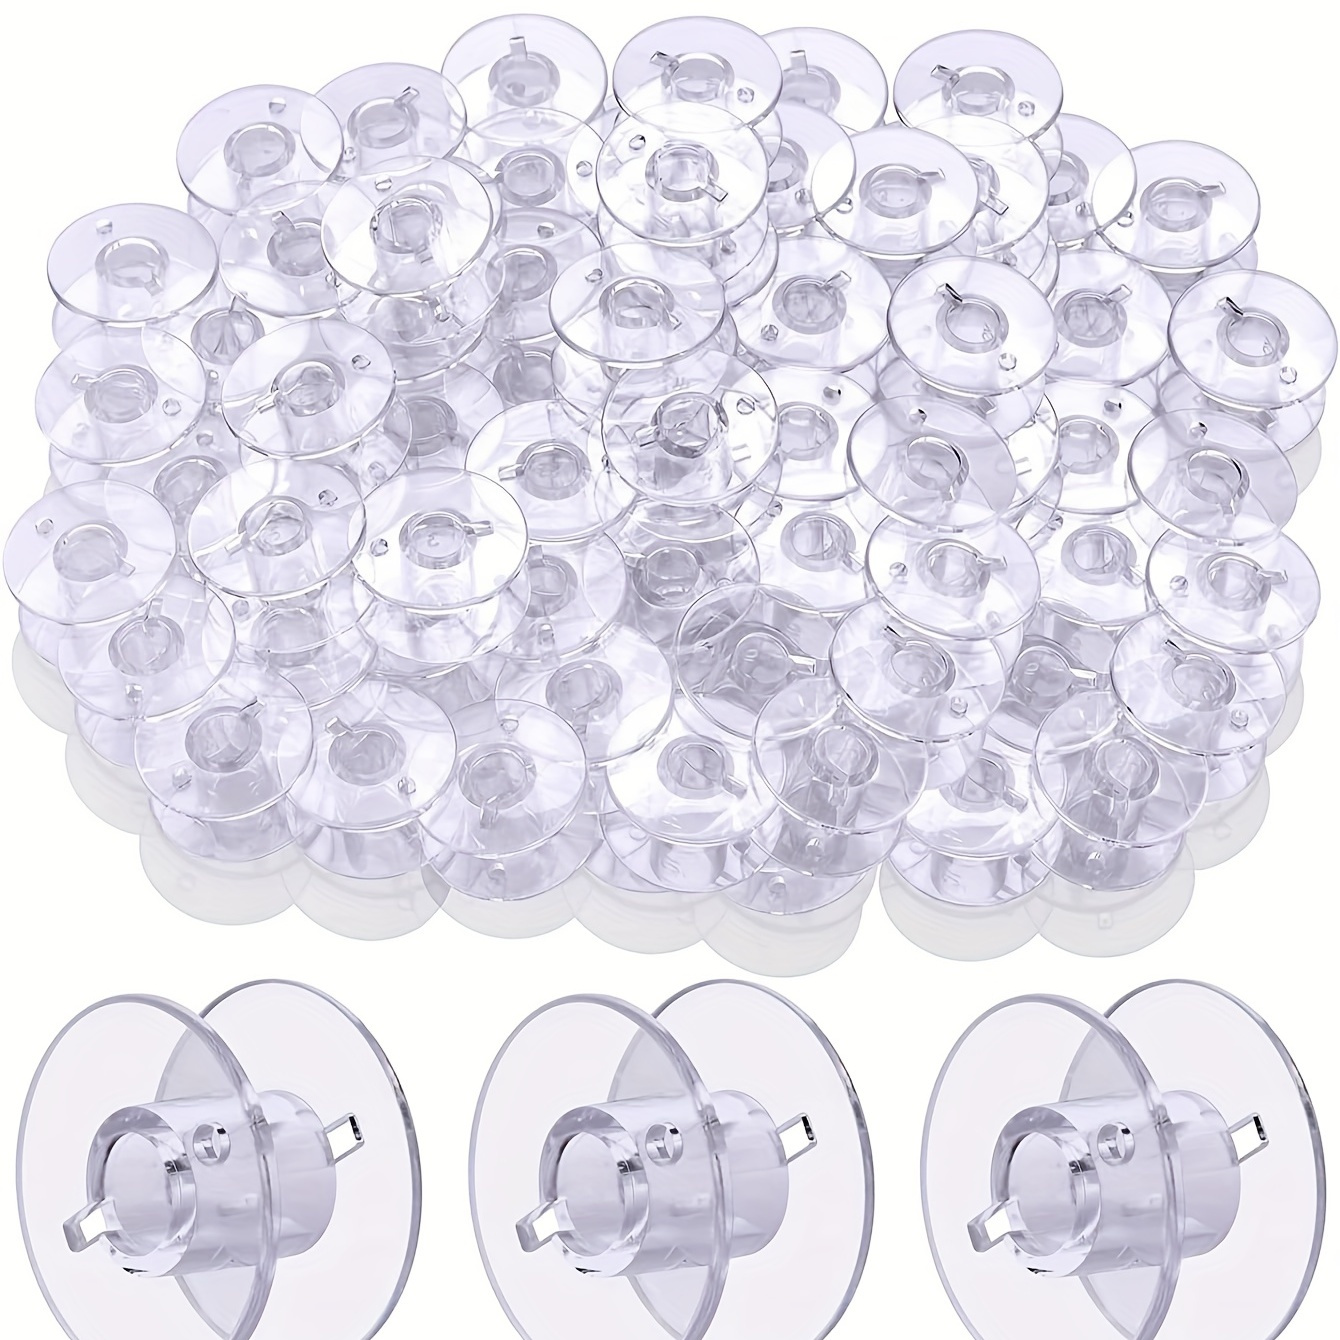 ZENITH 5pcs Clear Sewing Plastic spools bobbins for Brother Sewing